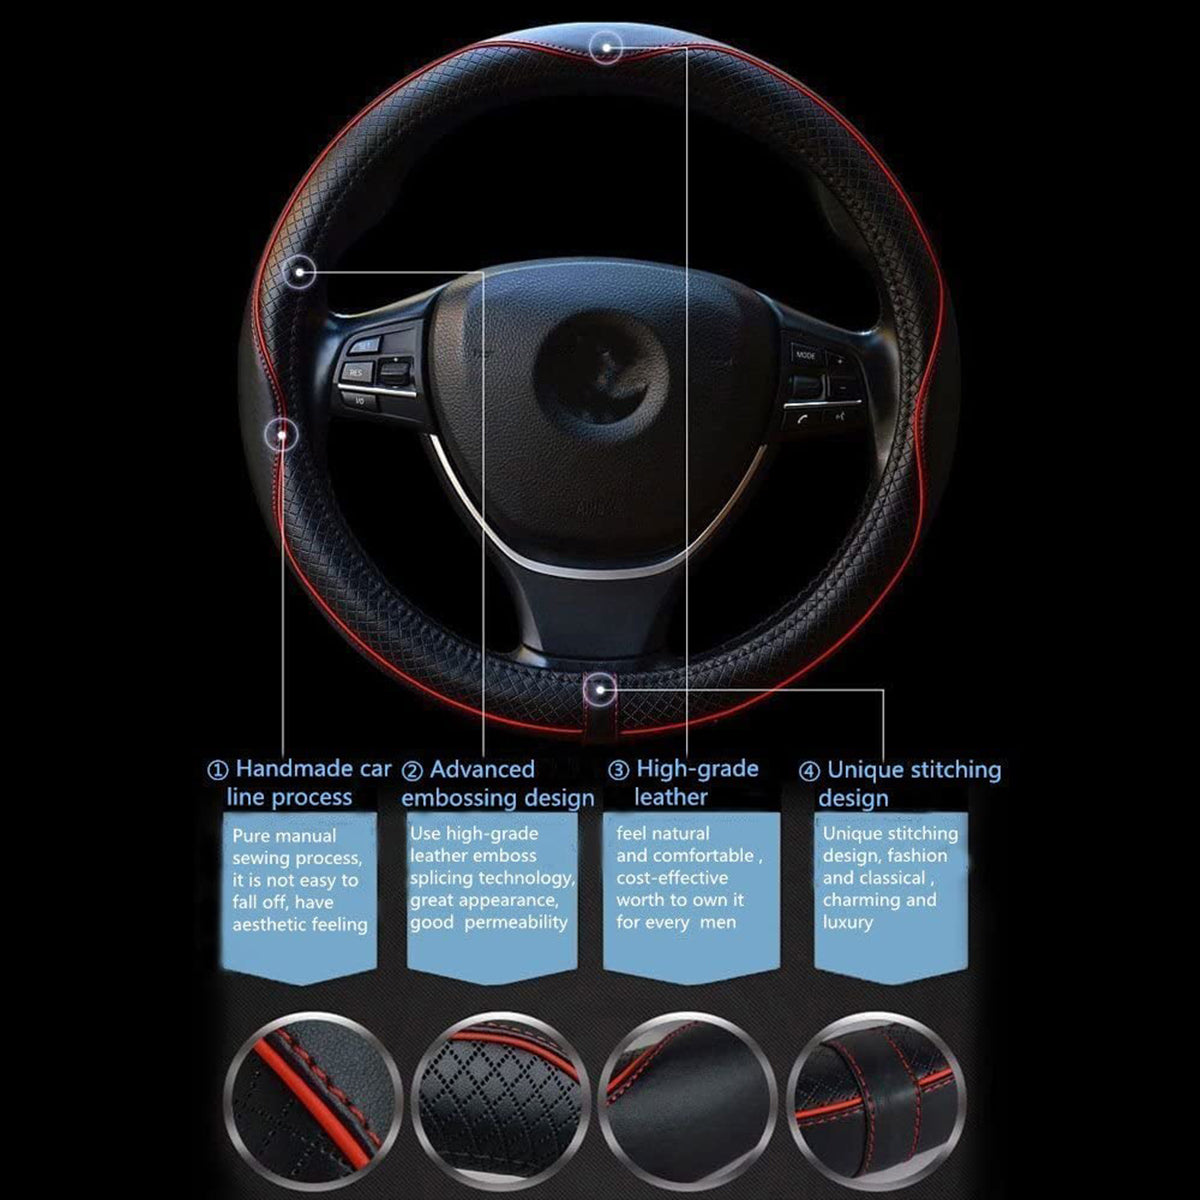 Car Steering Wheel Cover, Custom For Your Cars, Anti-Slip, Safety, Soft, Breathable, Heavy Duty, Thick, Full Surround, Sports Style, Car Accessories IN18990